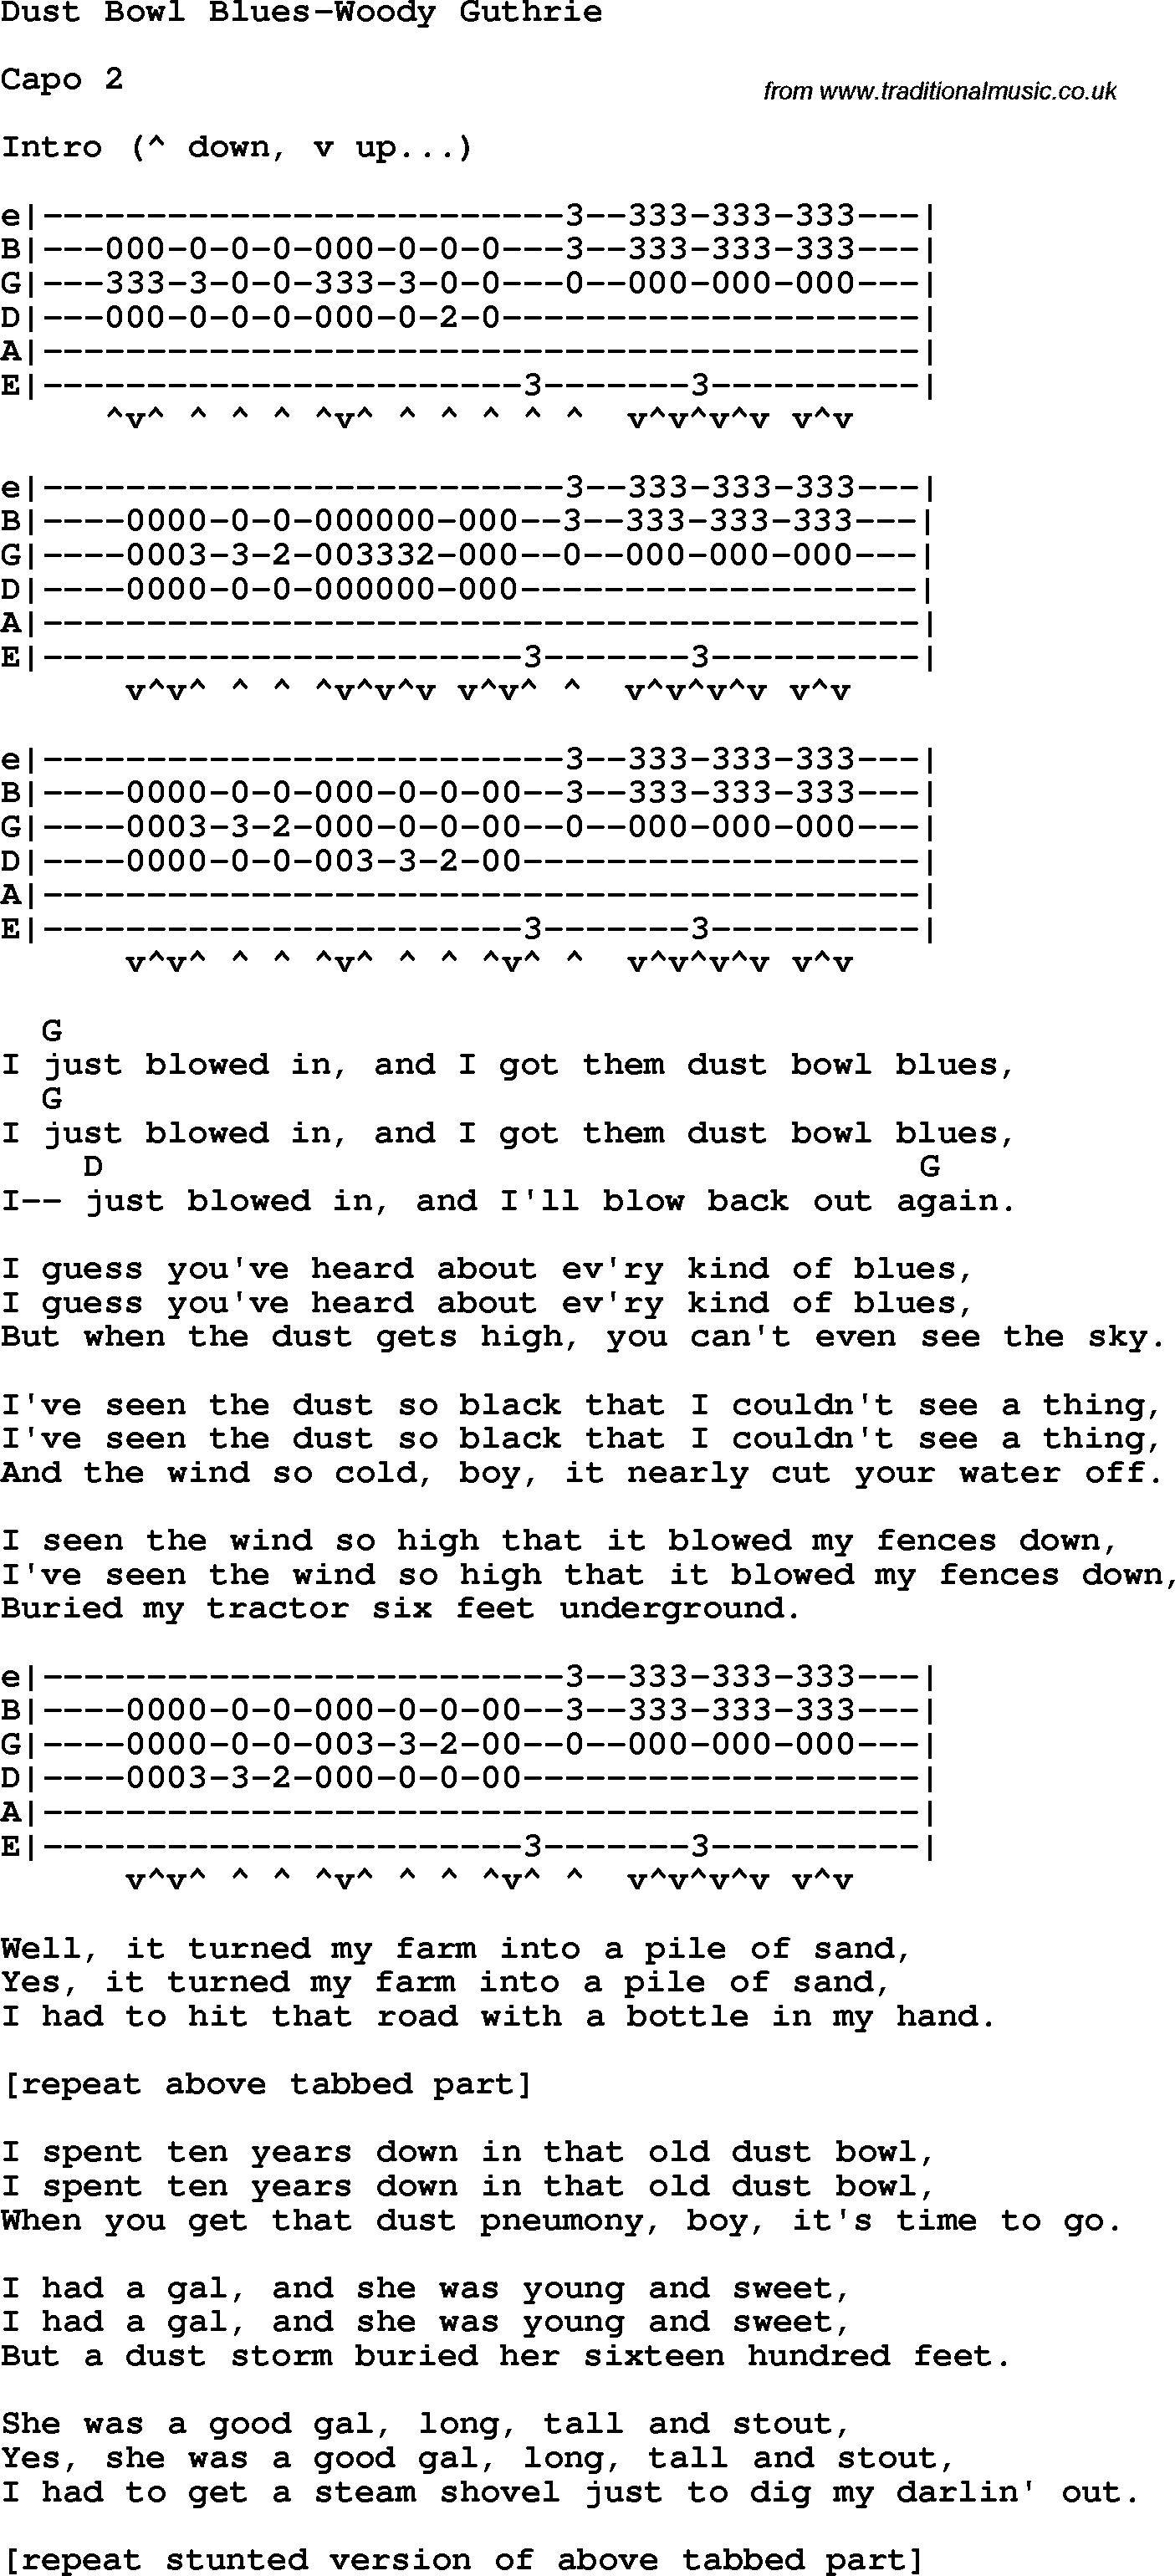 Protest Song Dust Bowl Blues-Woody Guthrie lyrics and chords